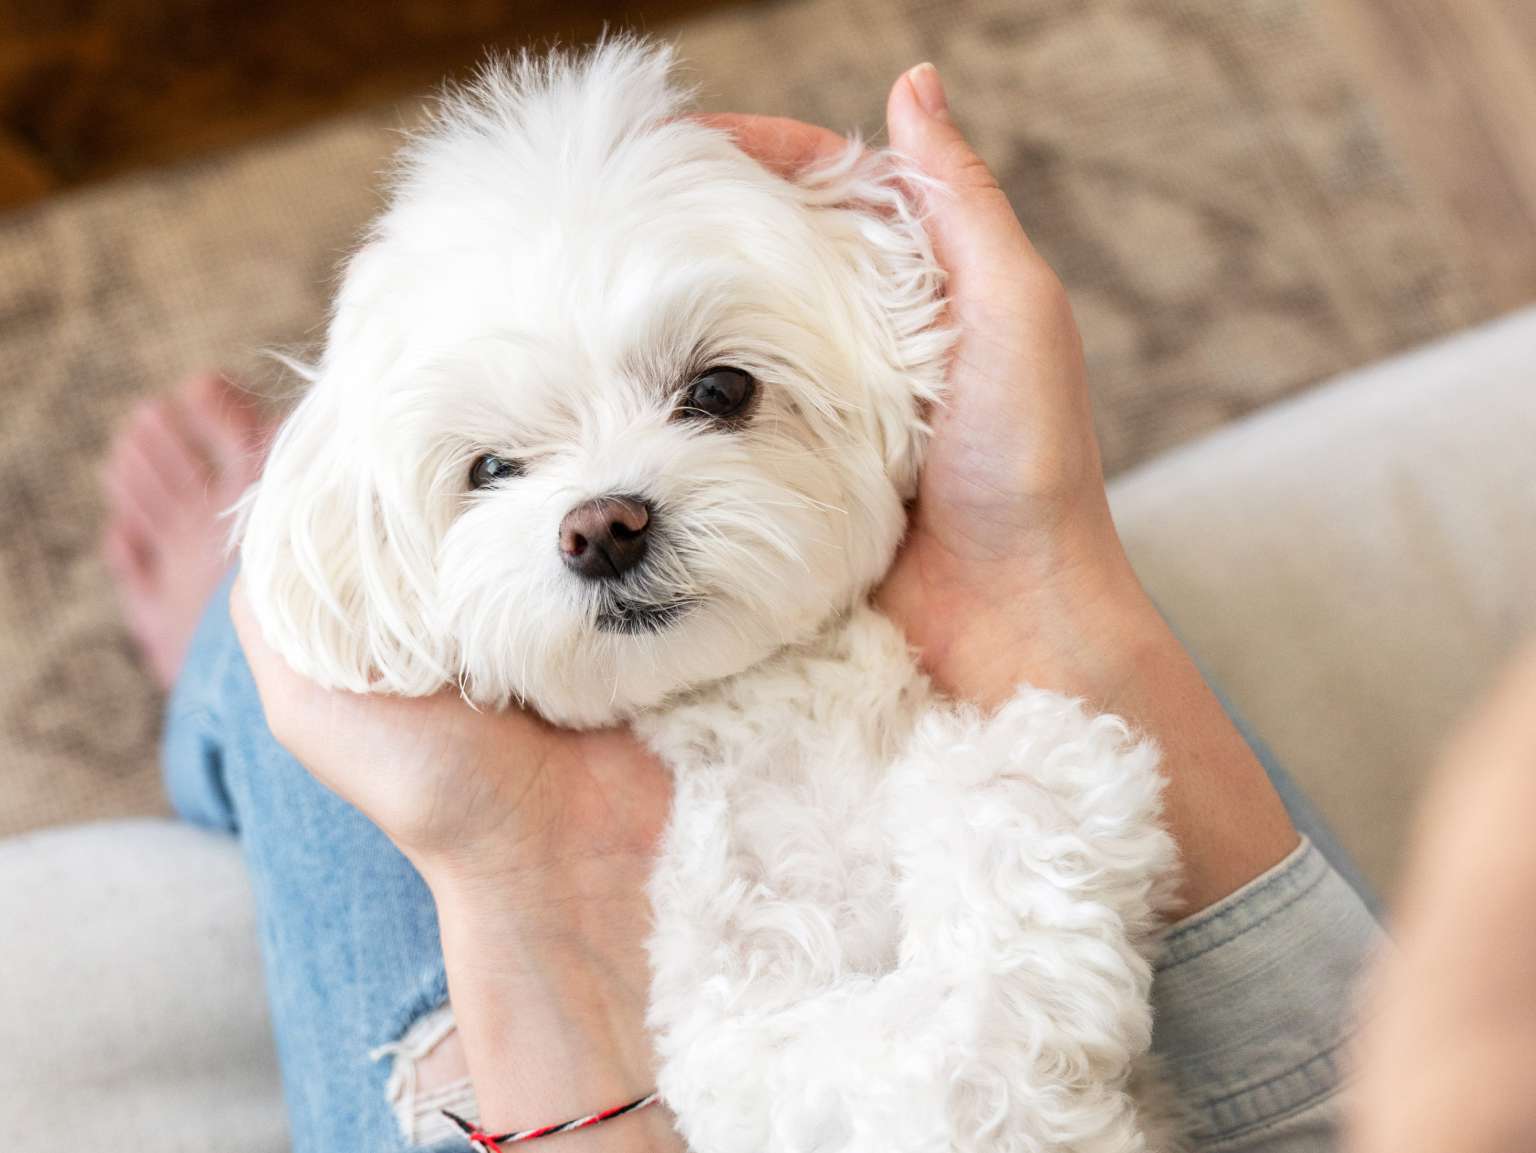 A close-up of a woman's hands holding a little white dog's head on her lap